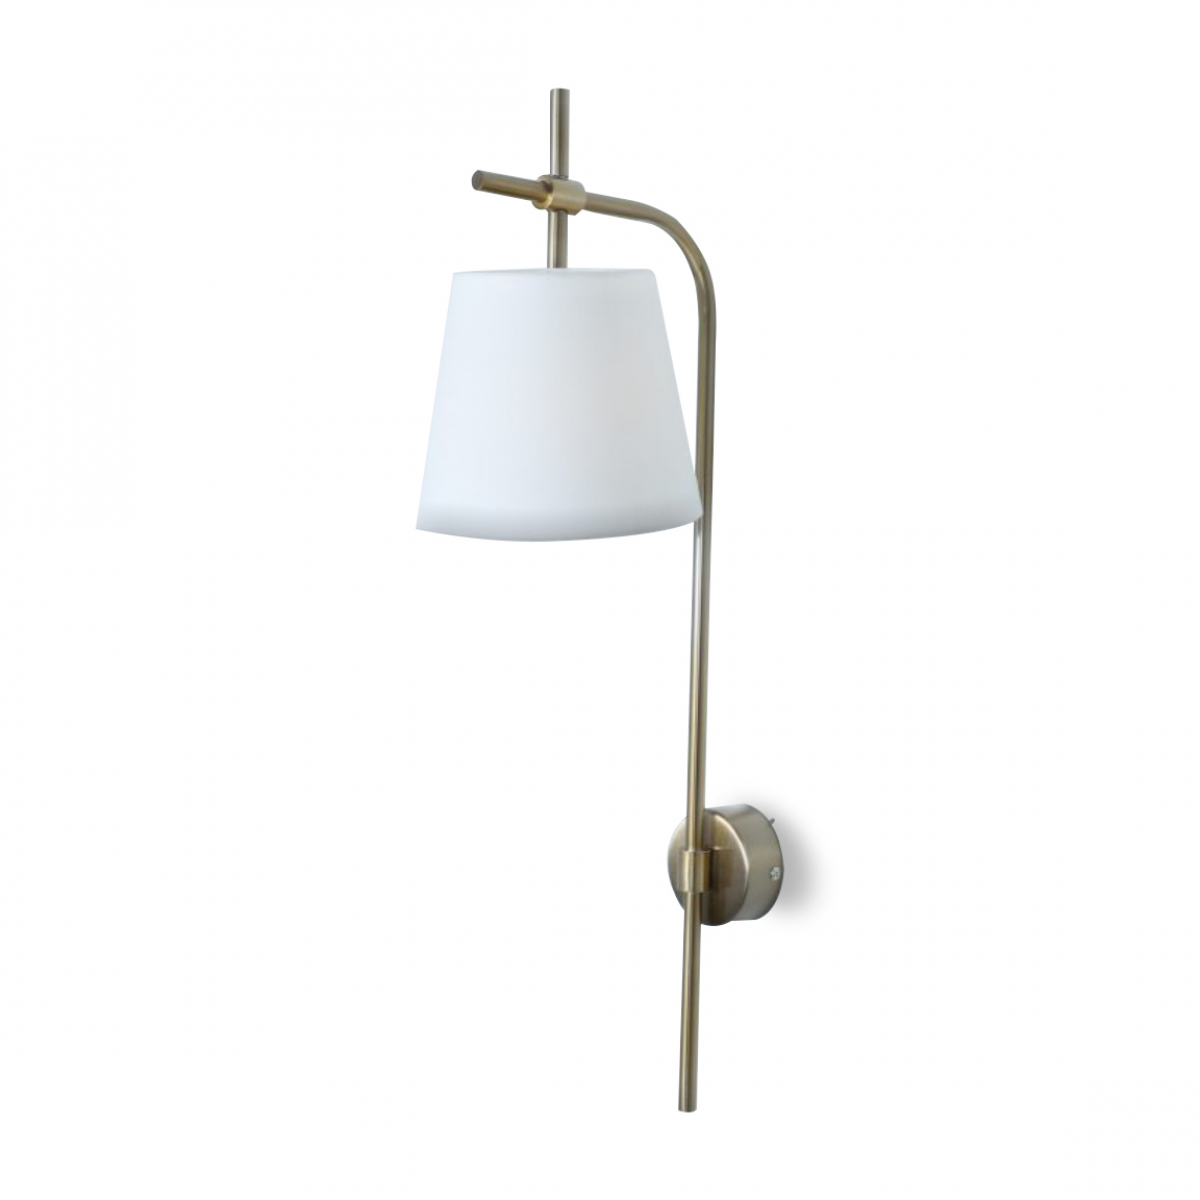 NEO CLASSICAL WALL LIGHT